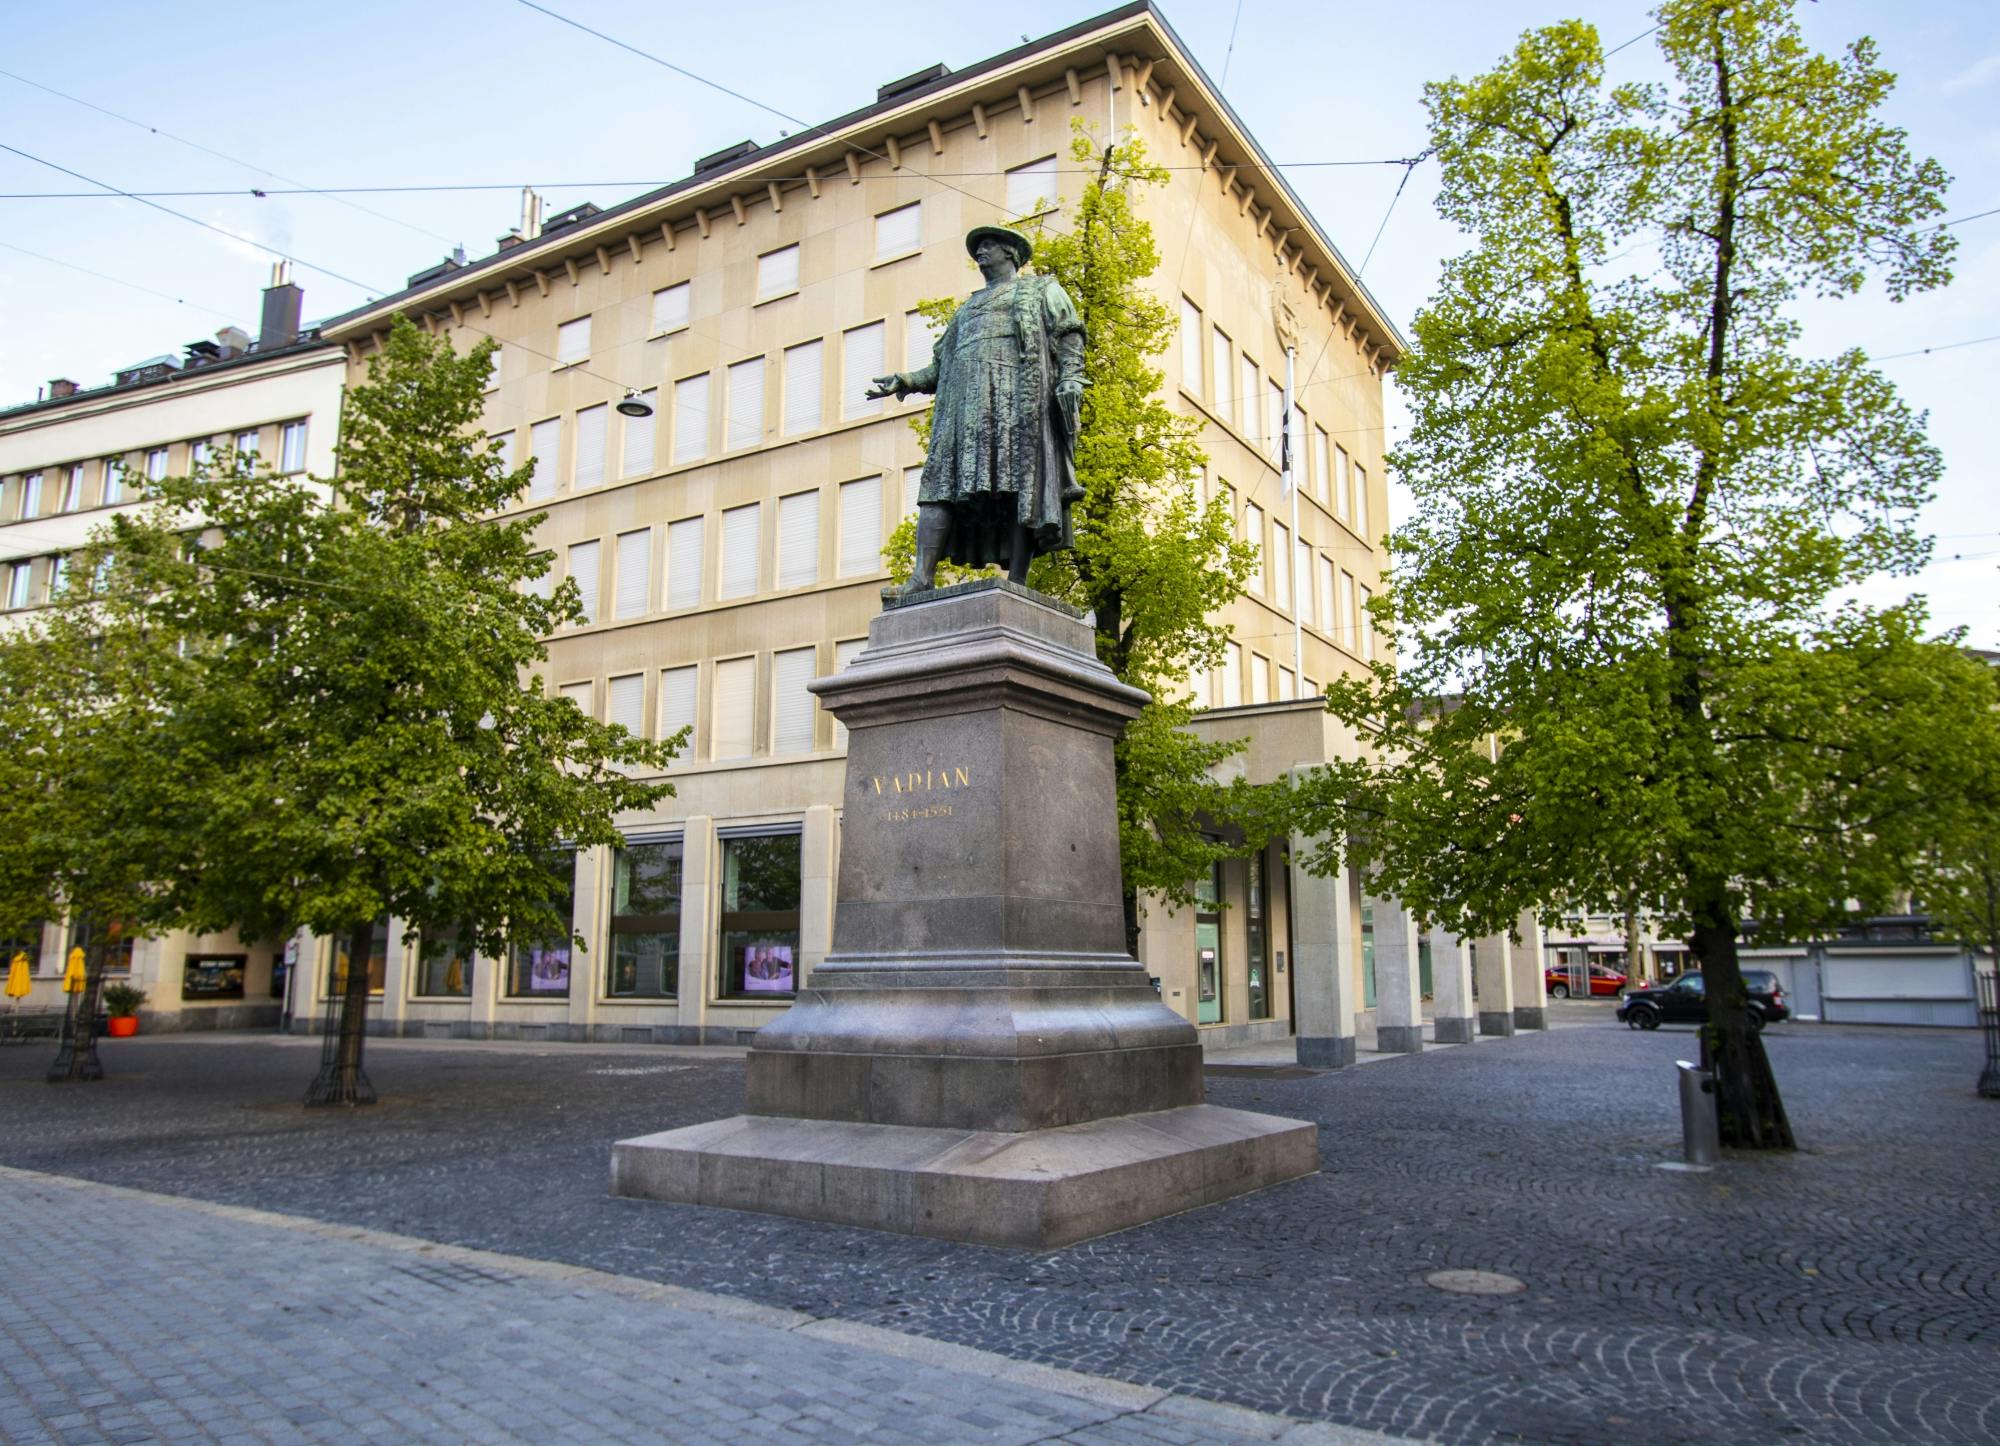 Explore St. Gallen in 1 hour with a Local Musement